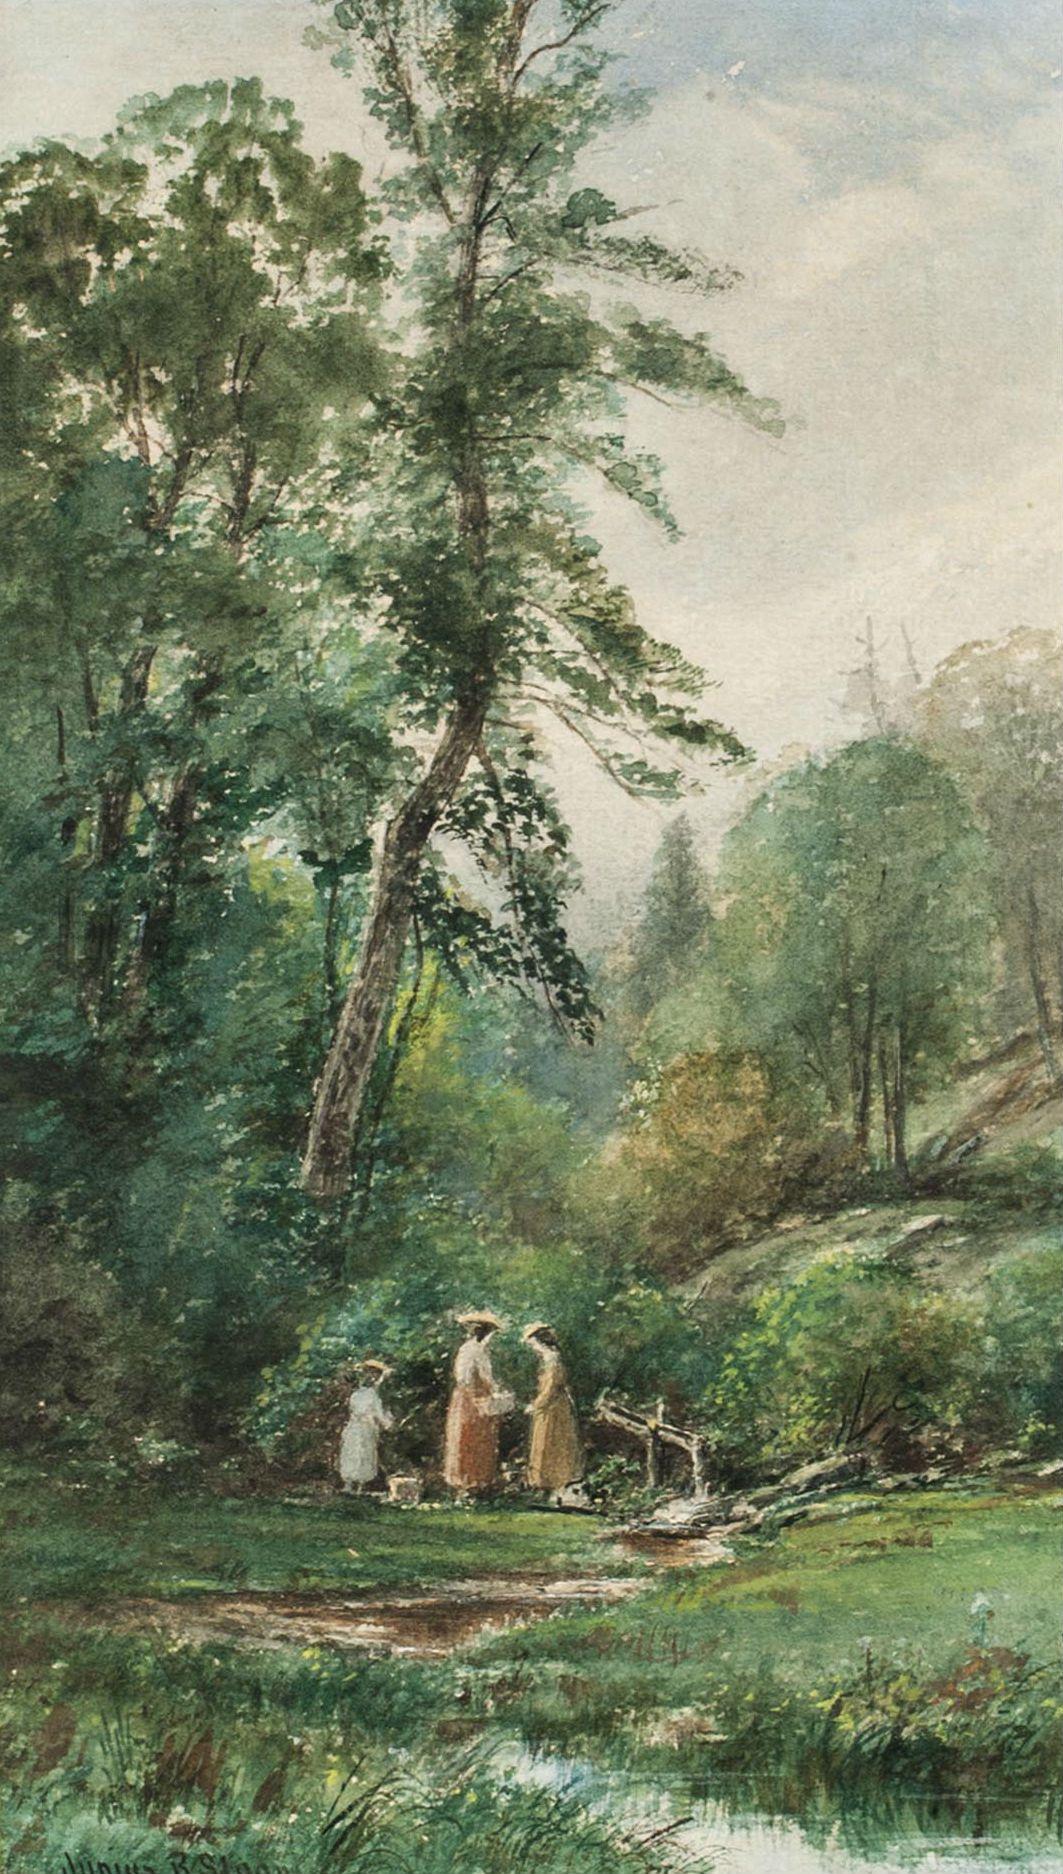 Junius Sloan (1827-1900)
Afternoon Picnic
Watercolor on paper
16 x 11 1/2 inches
Signed lower left
